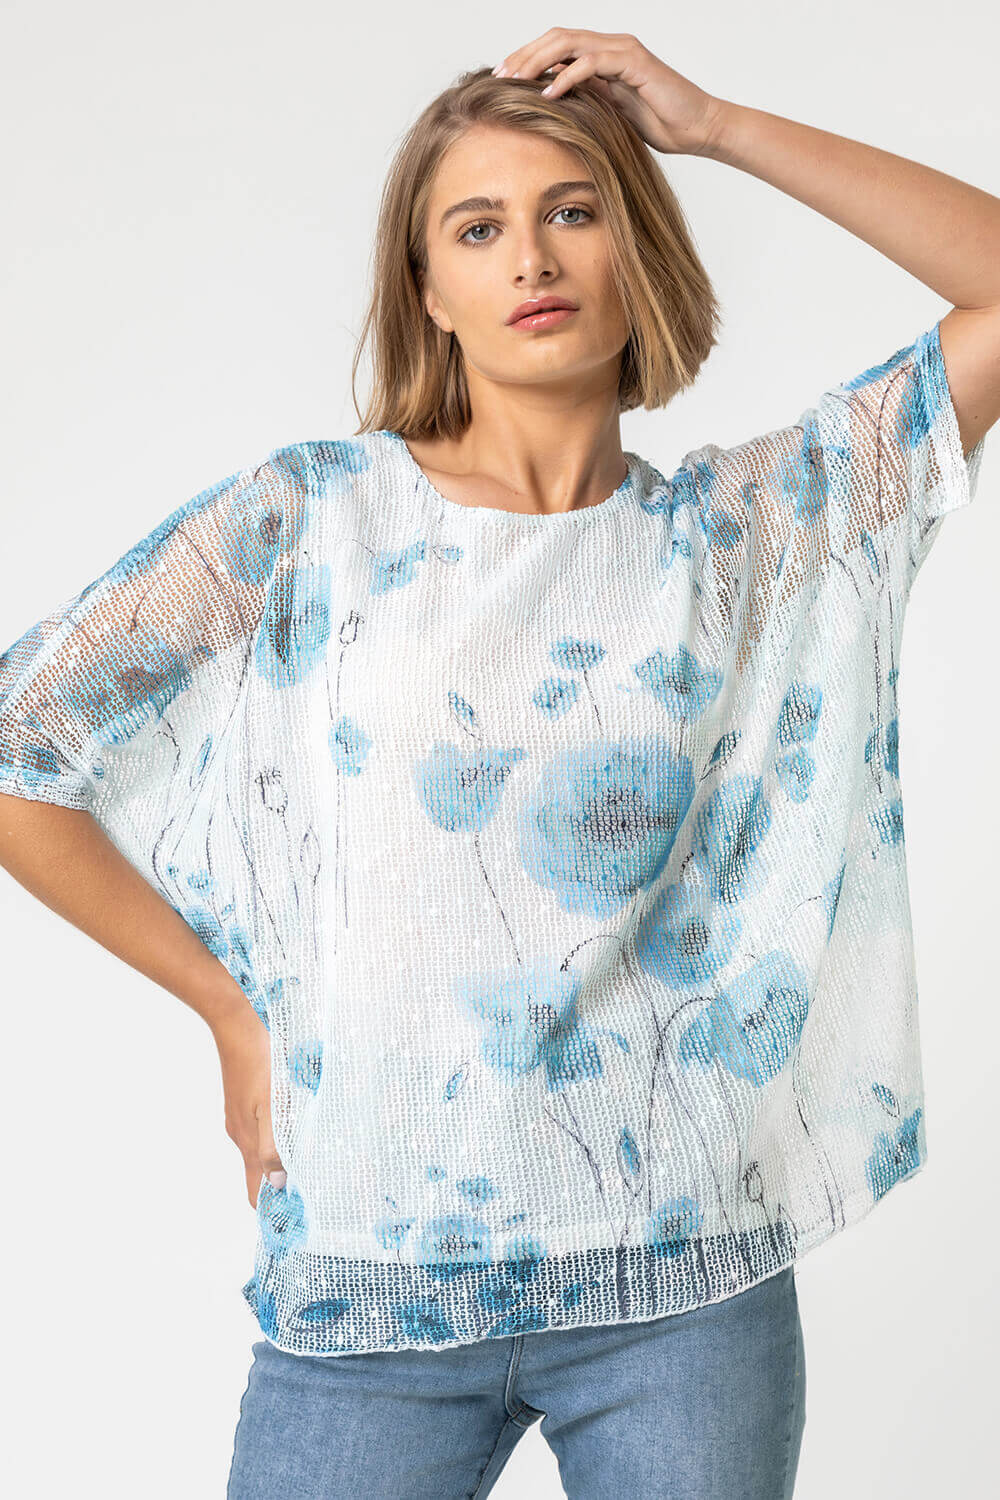 Mesh Overlay Floral Print Top